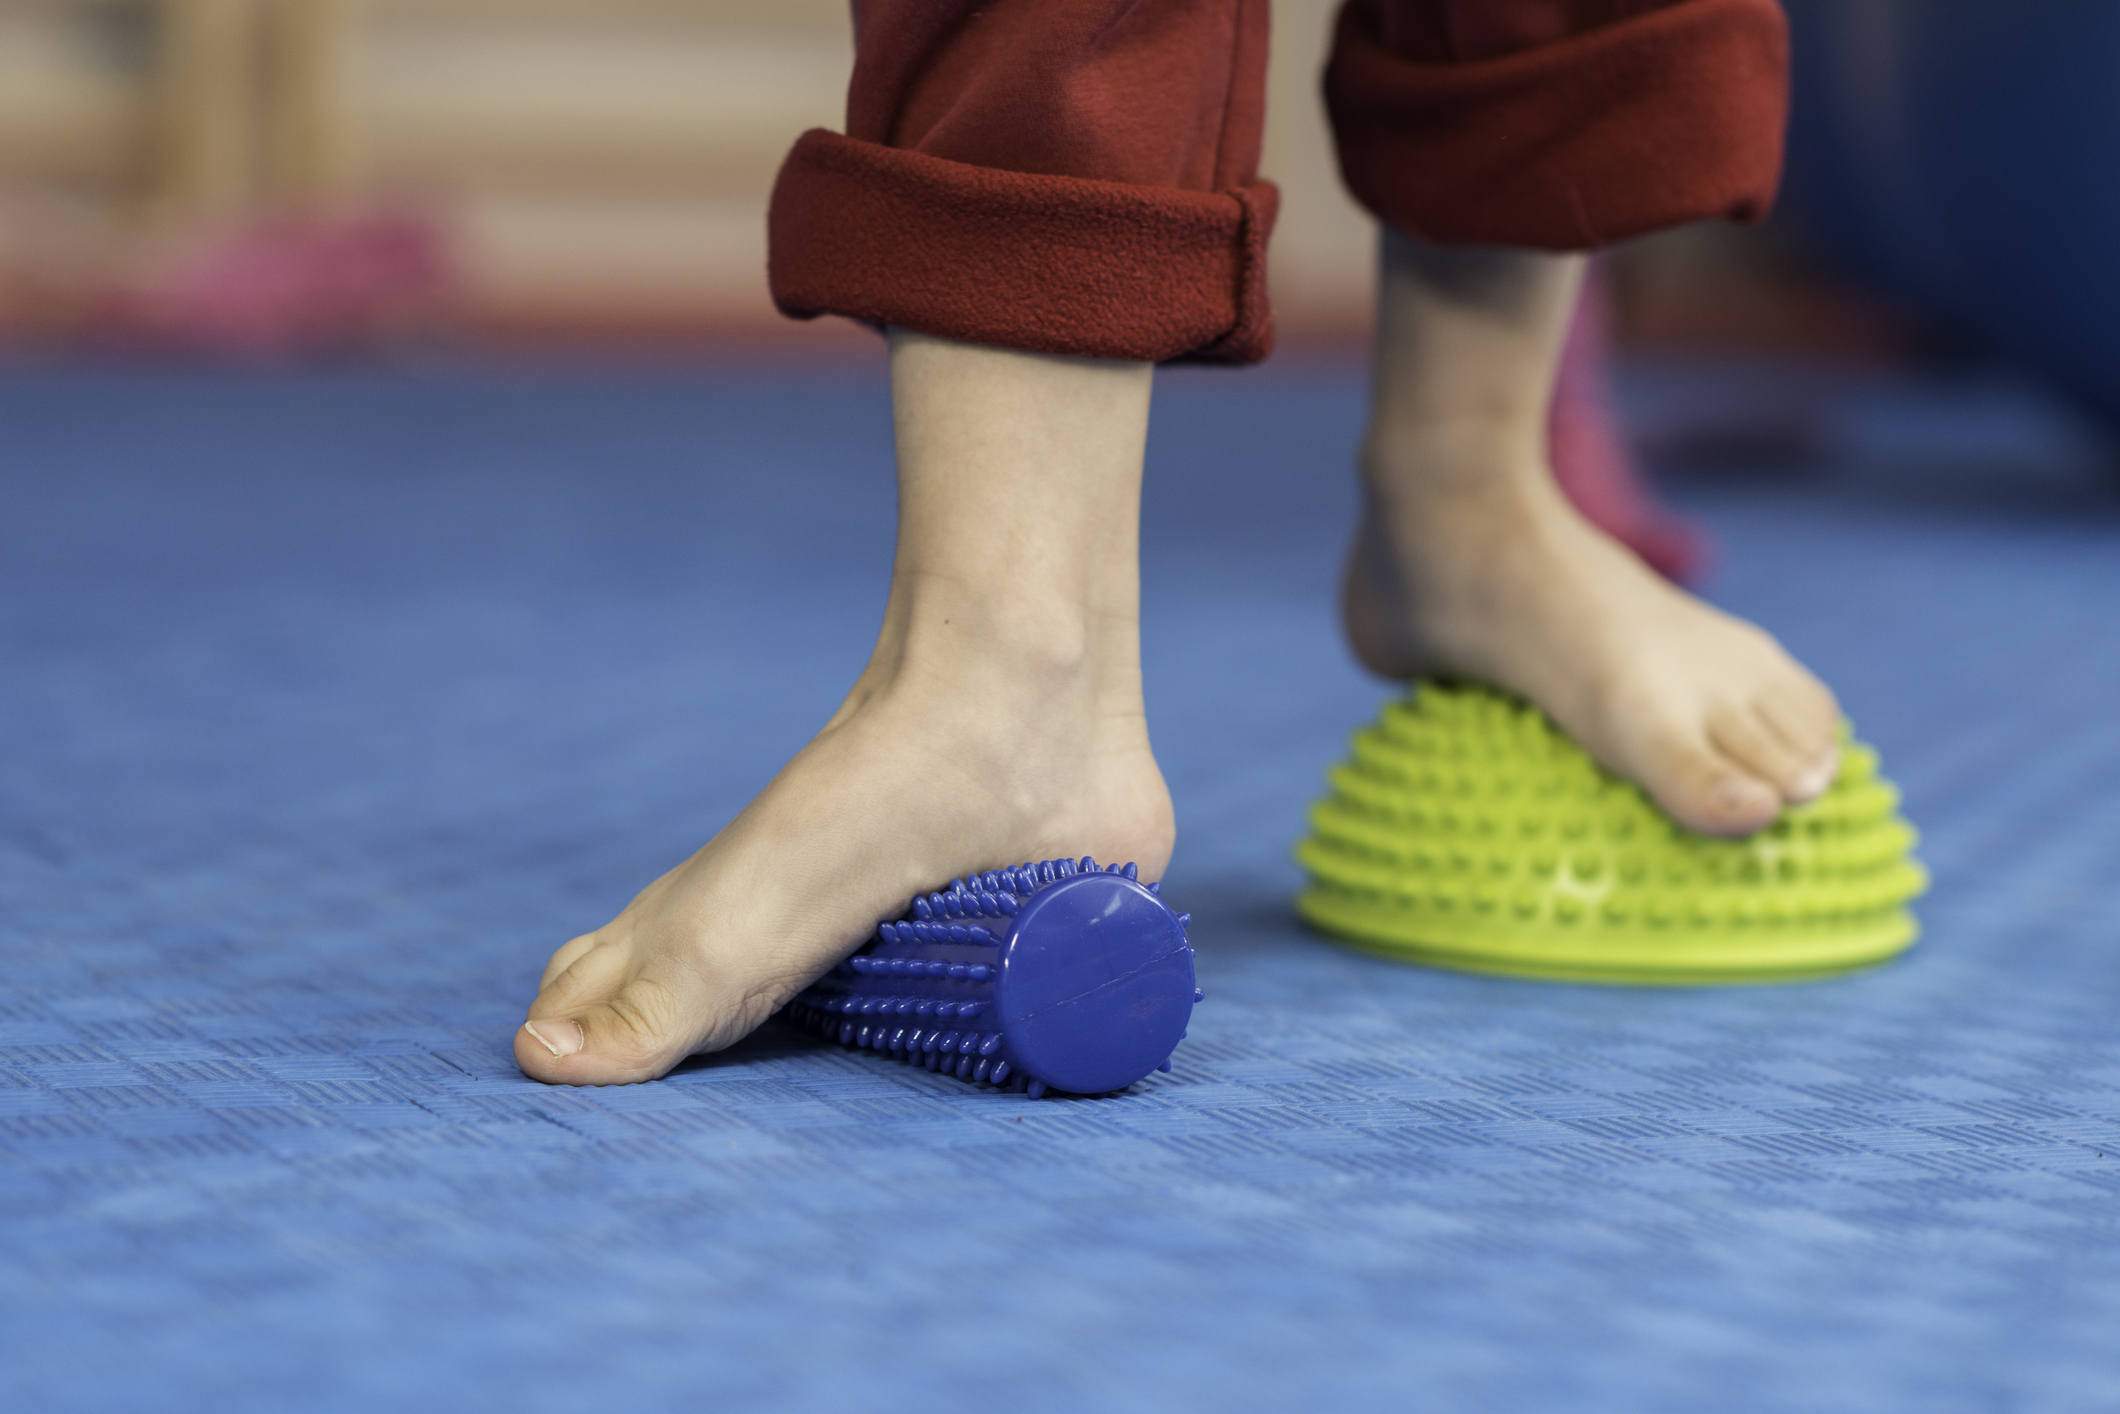 Flat feet physical therapy - Little boy stepping onto spiked rubber roller